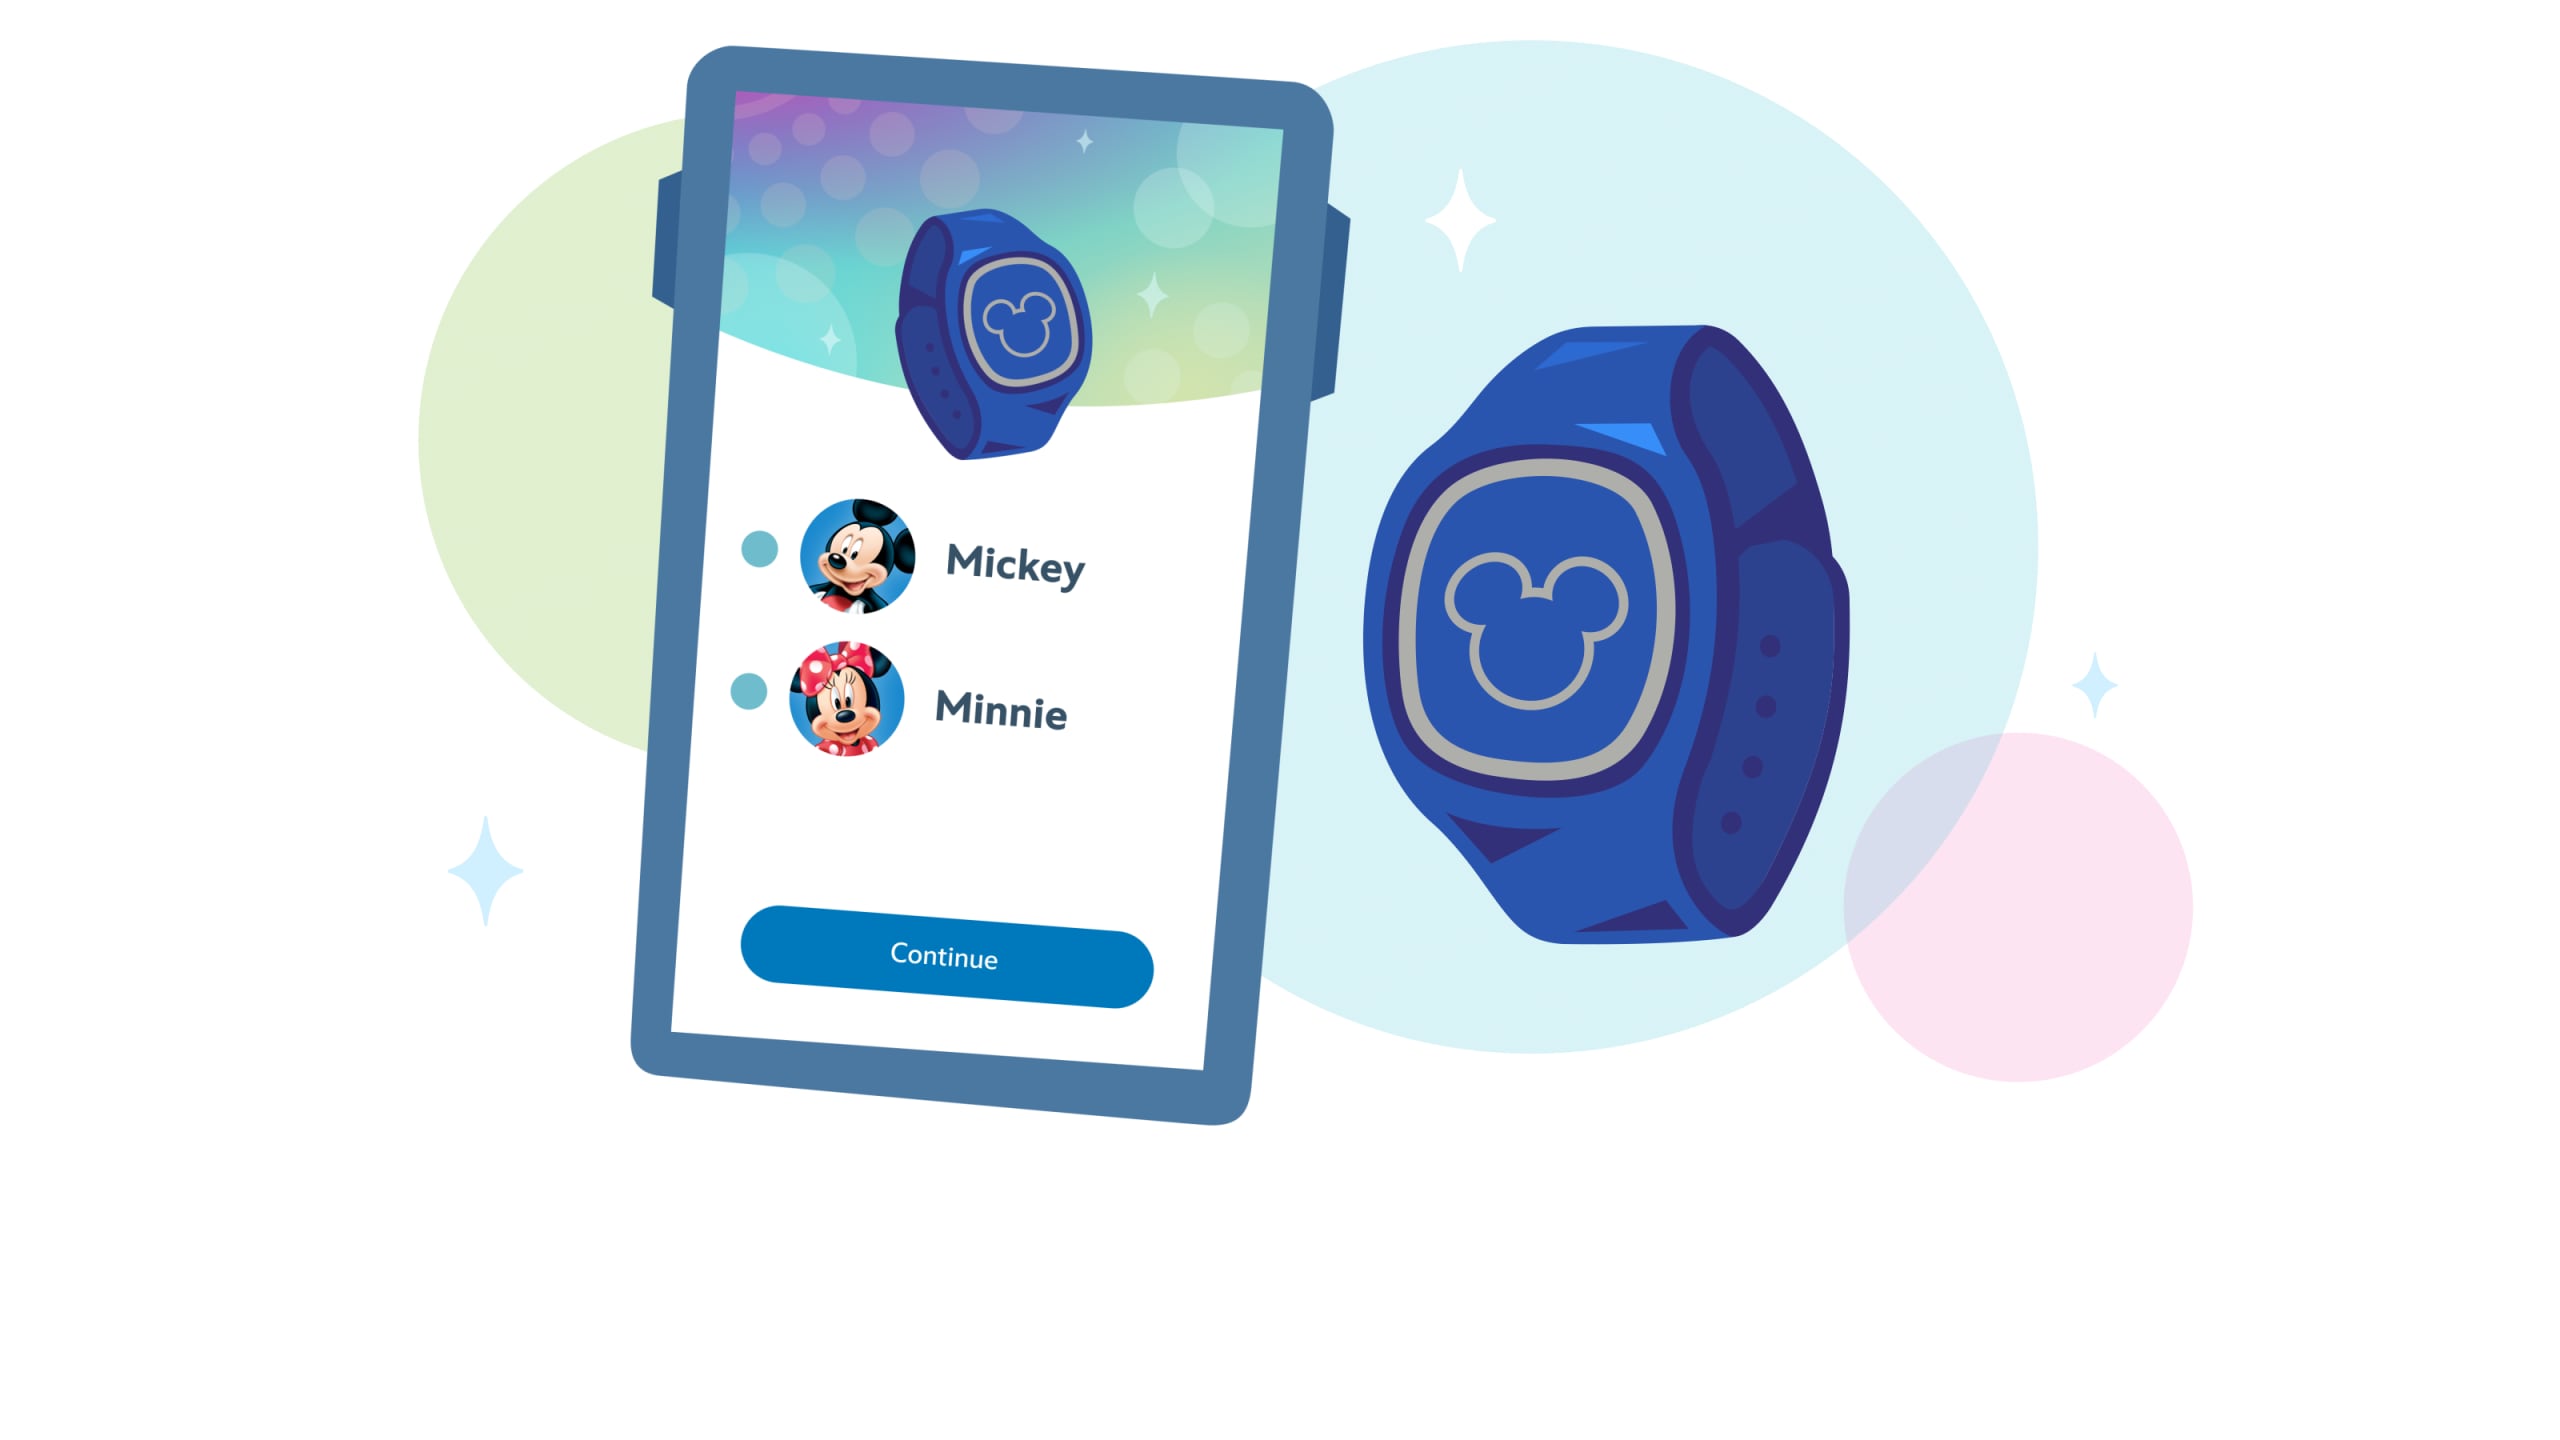 An icon featuring a MagicBand and a smart phone